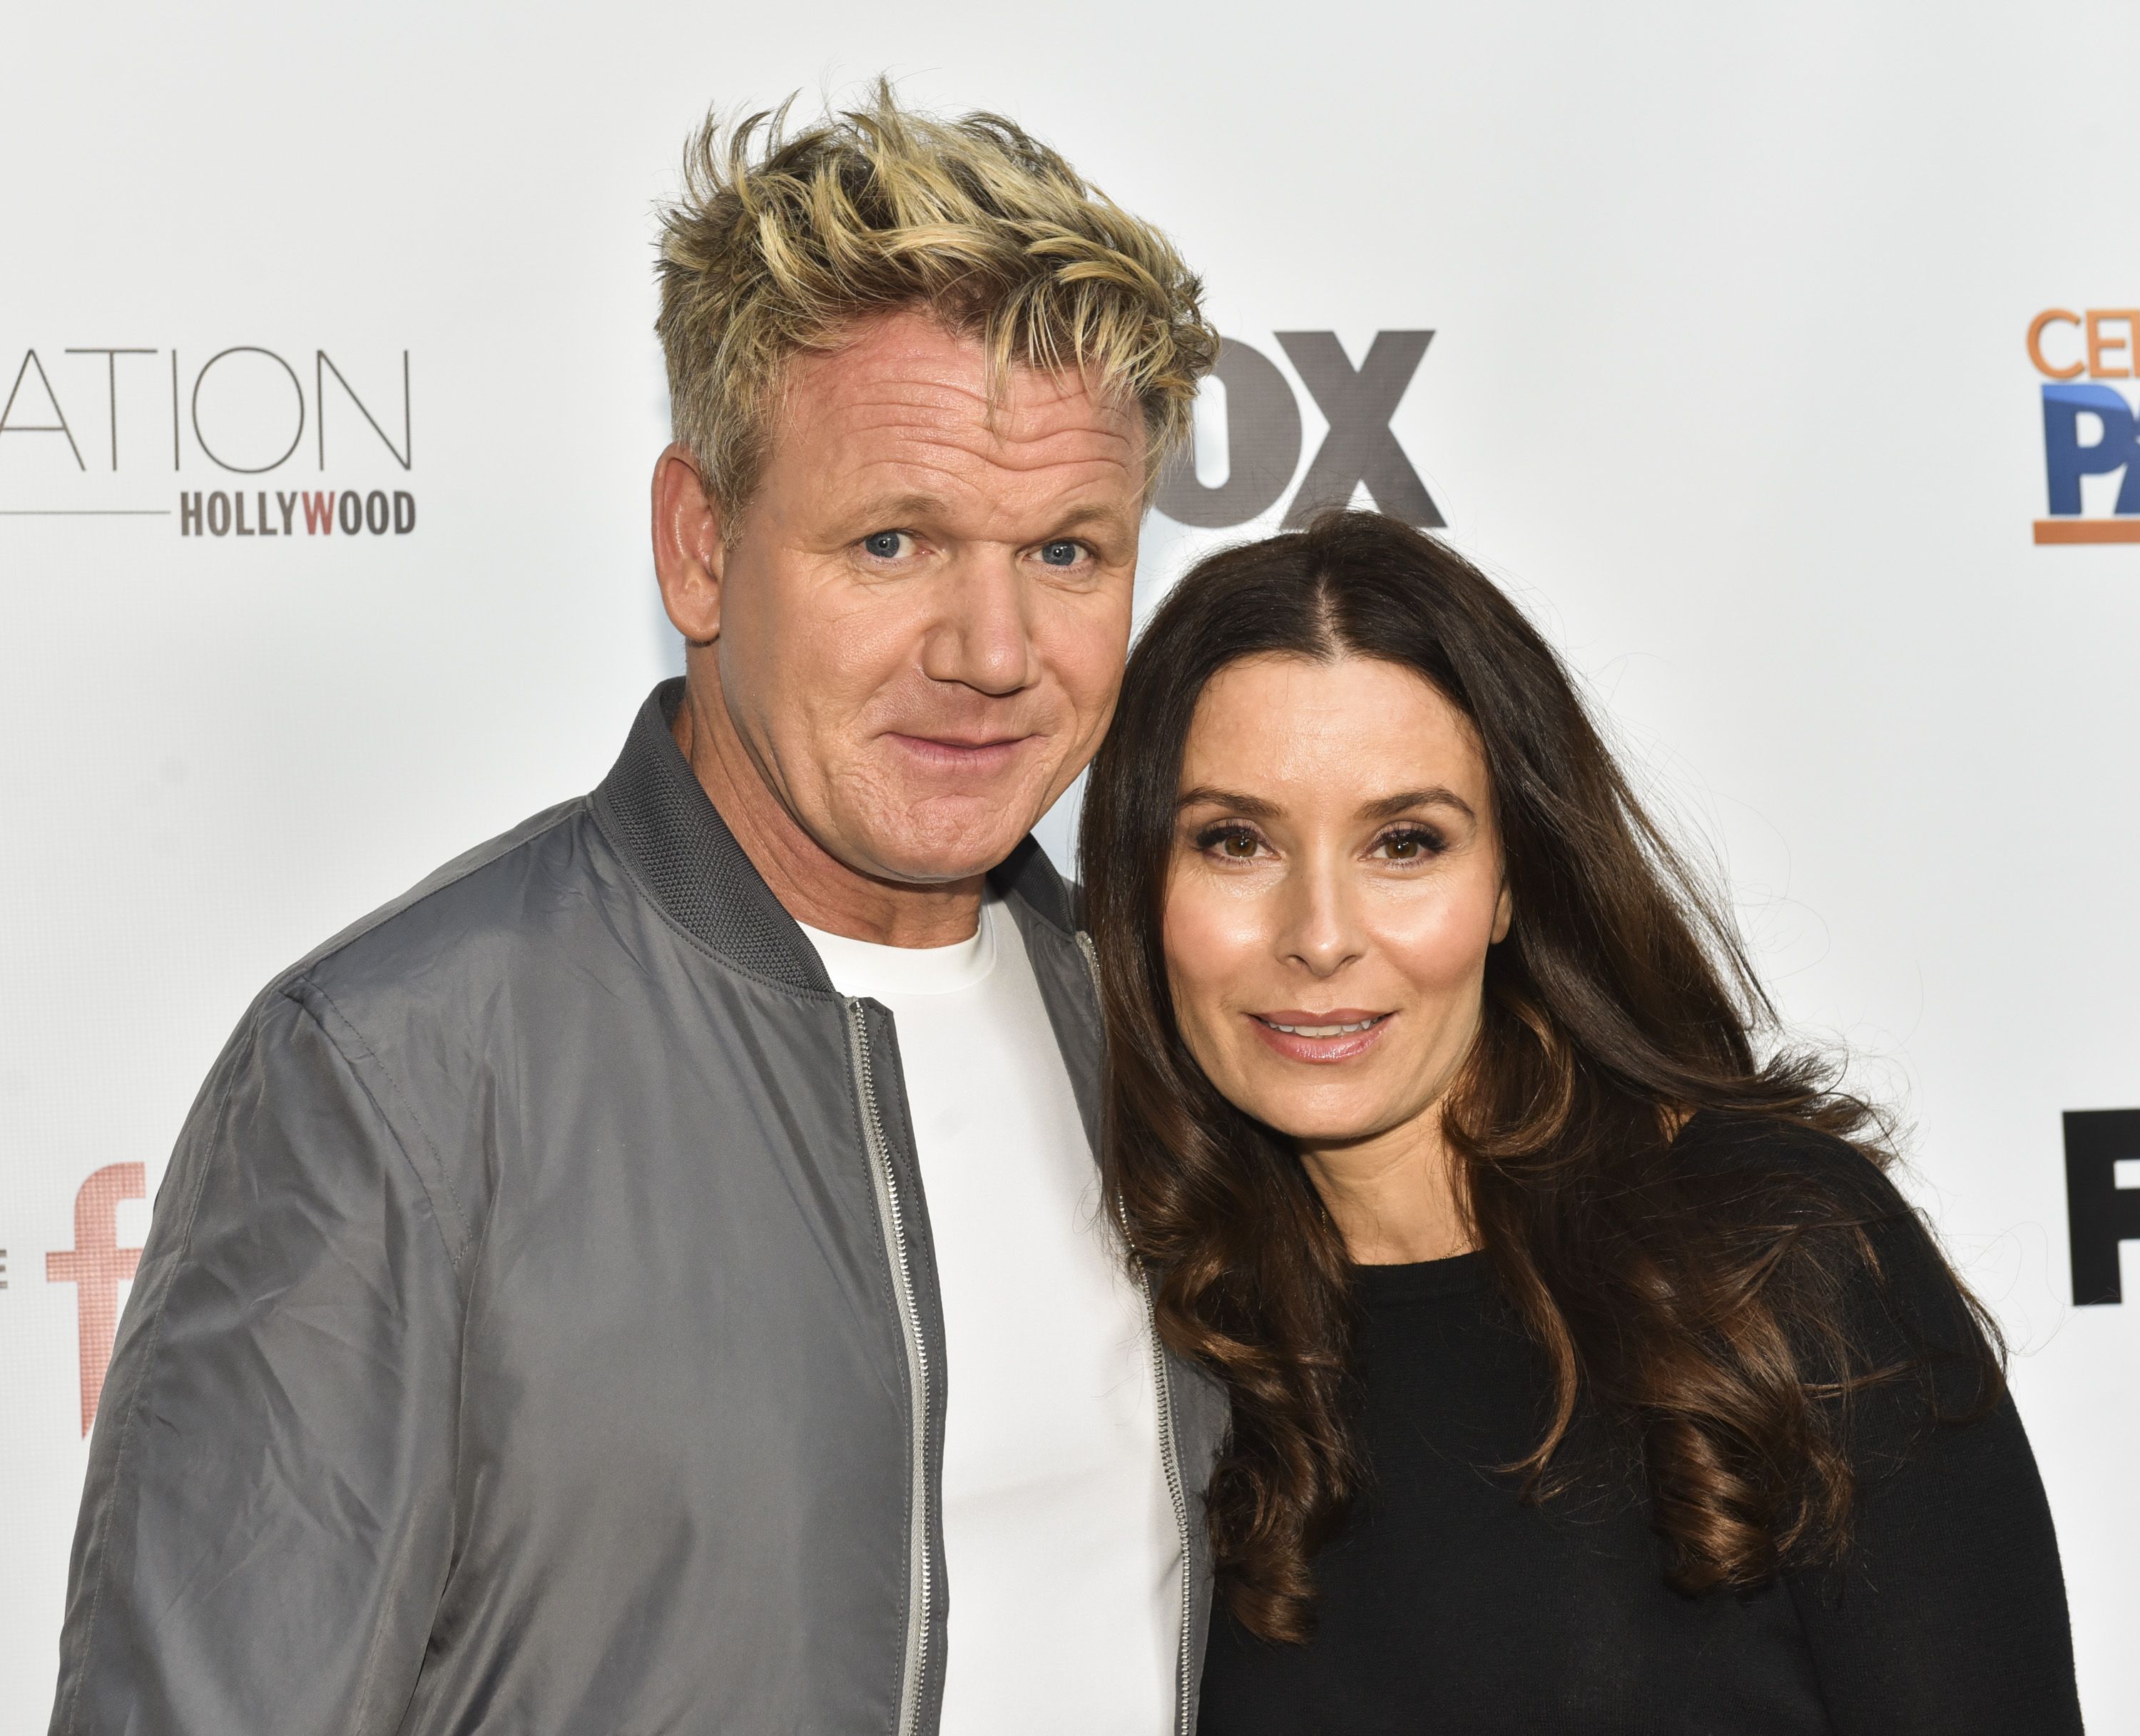 Celebrity chef Gordon Ramsay and Tana Ramsay at "The F Word" celebration at Station Hollywood at W Hollywood Hotel on May 22, 2017 | Photo: Getty Images